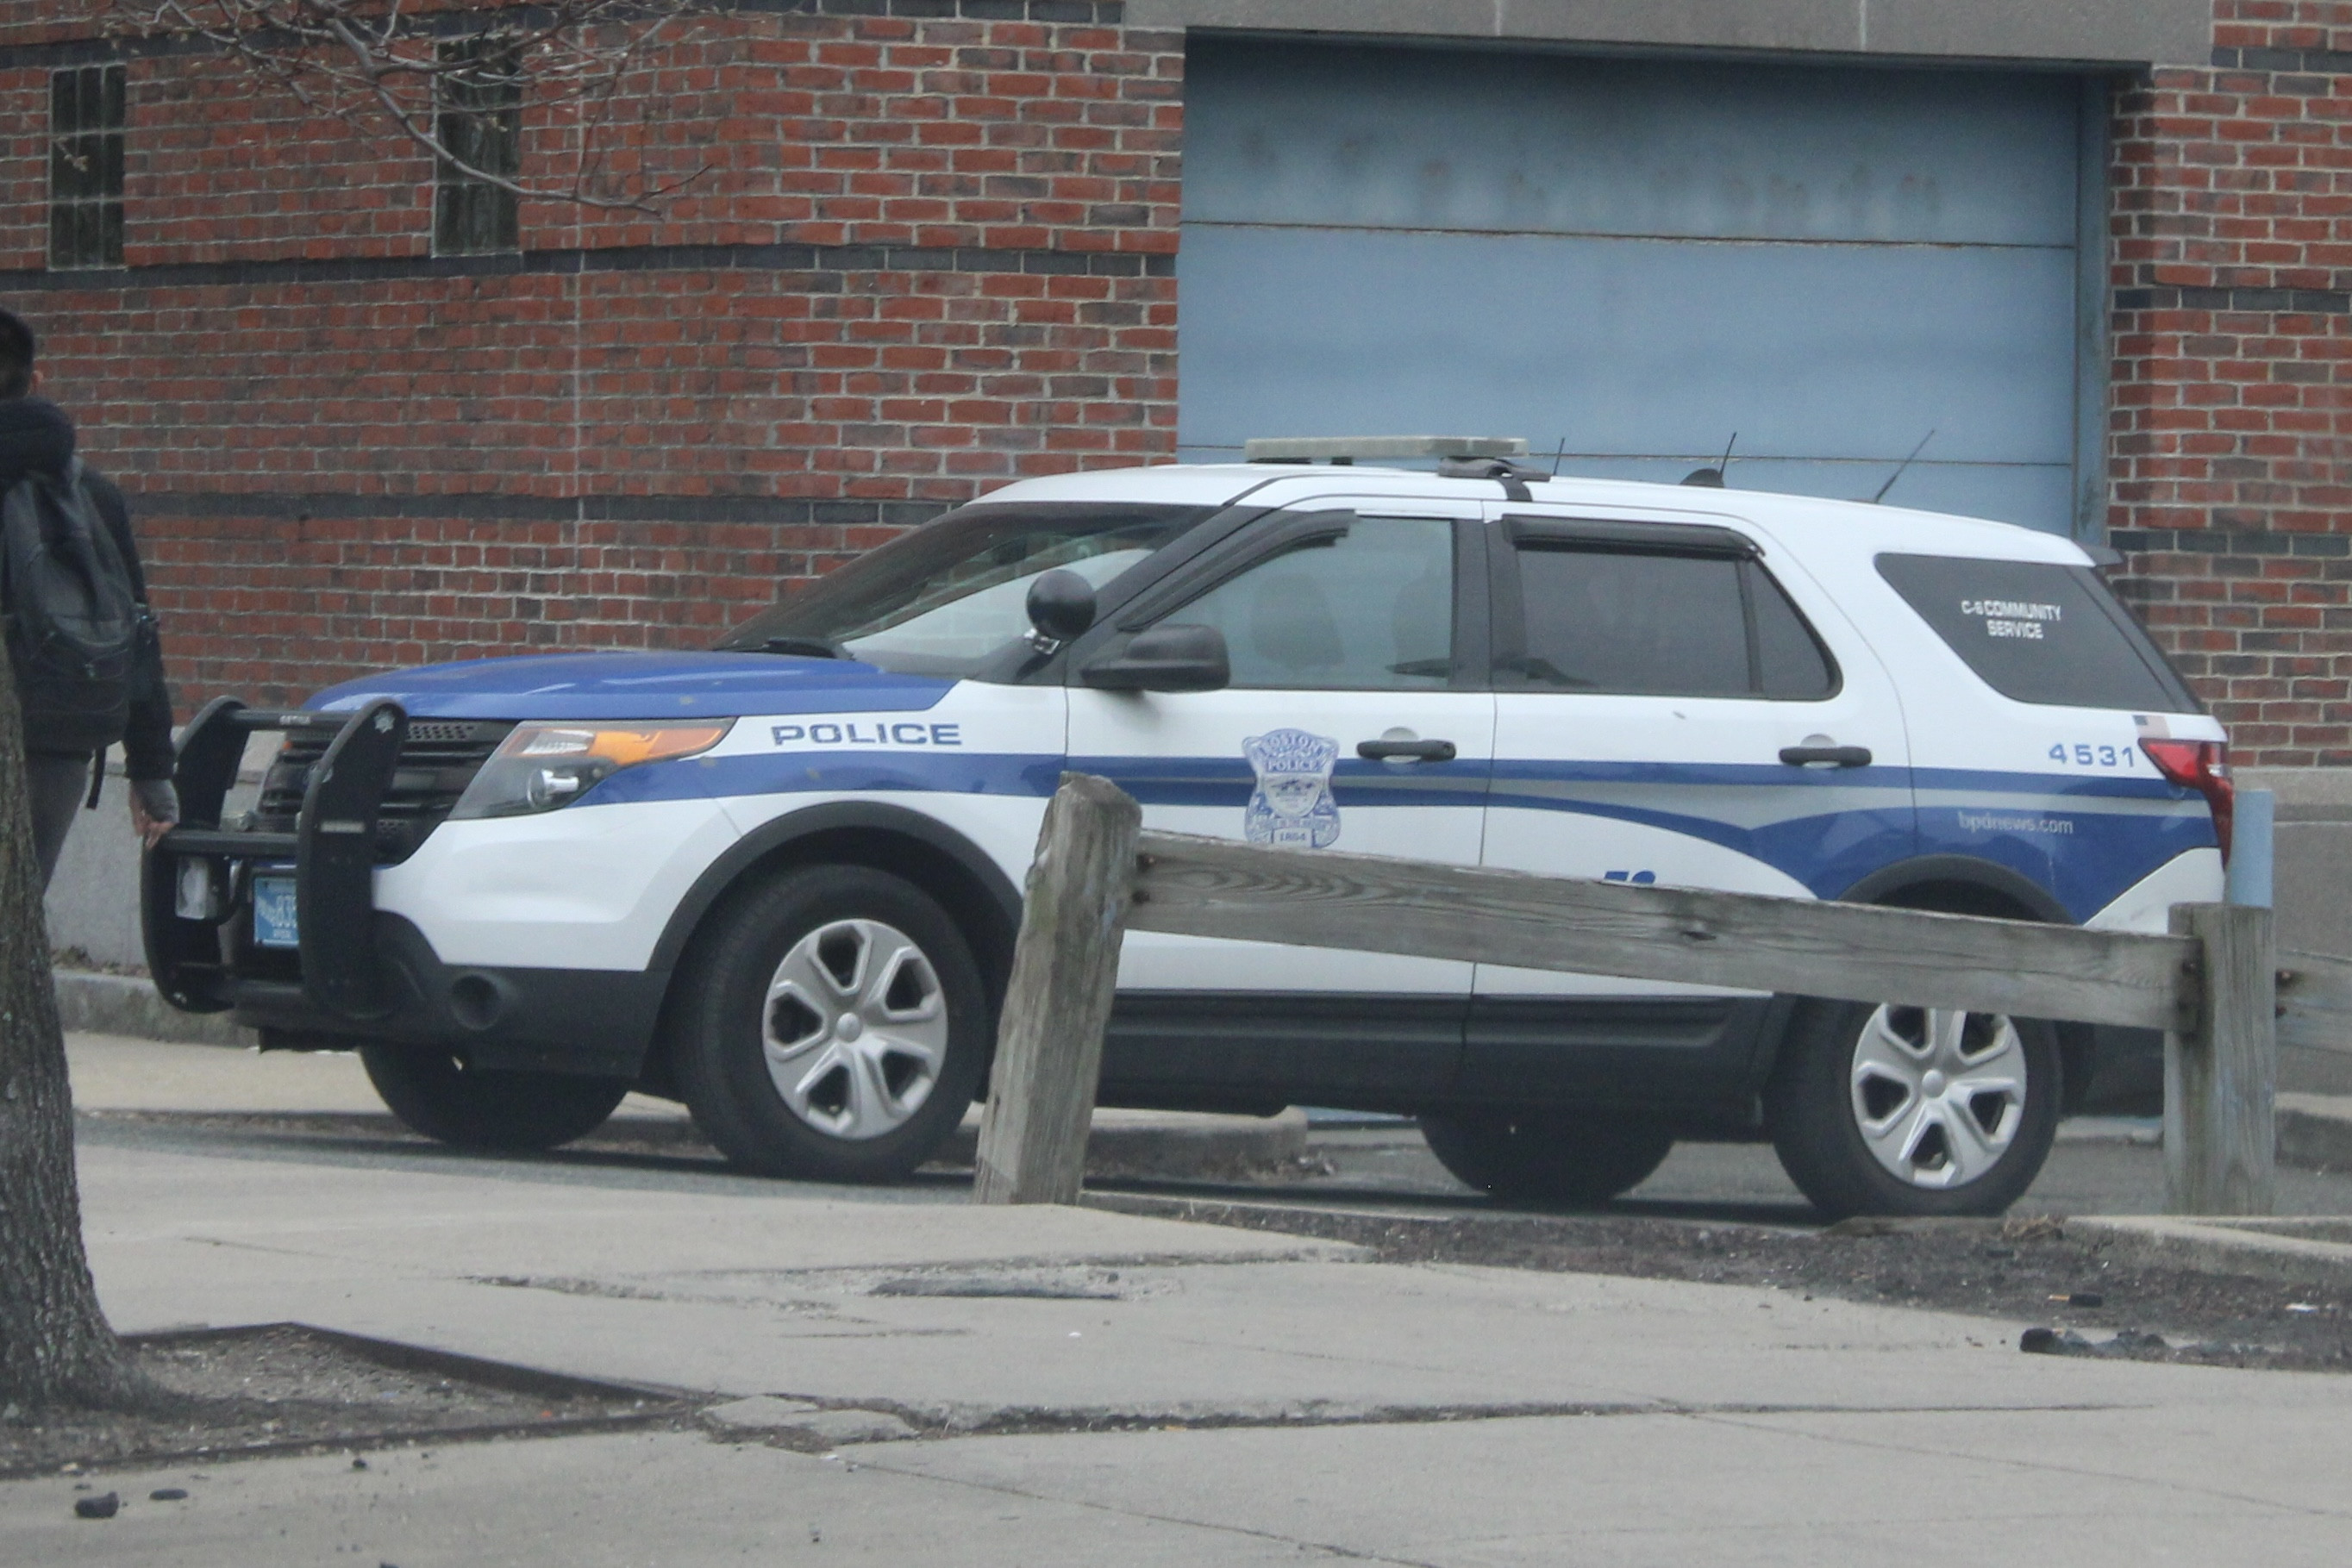 A photo  of Boston Police
            Cruiser 4531, a 2014 Ford Police Interceptor Utility             taken by @riemergencyvehicles